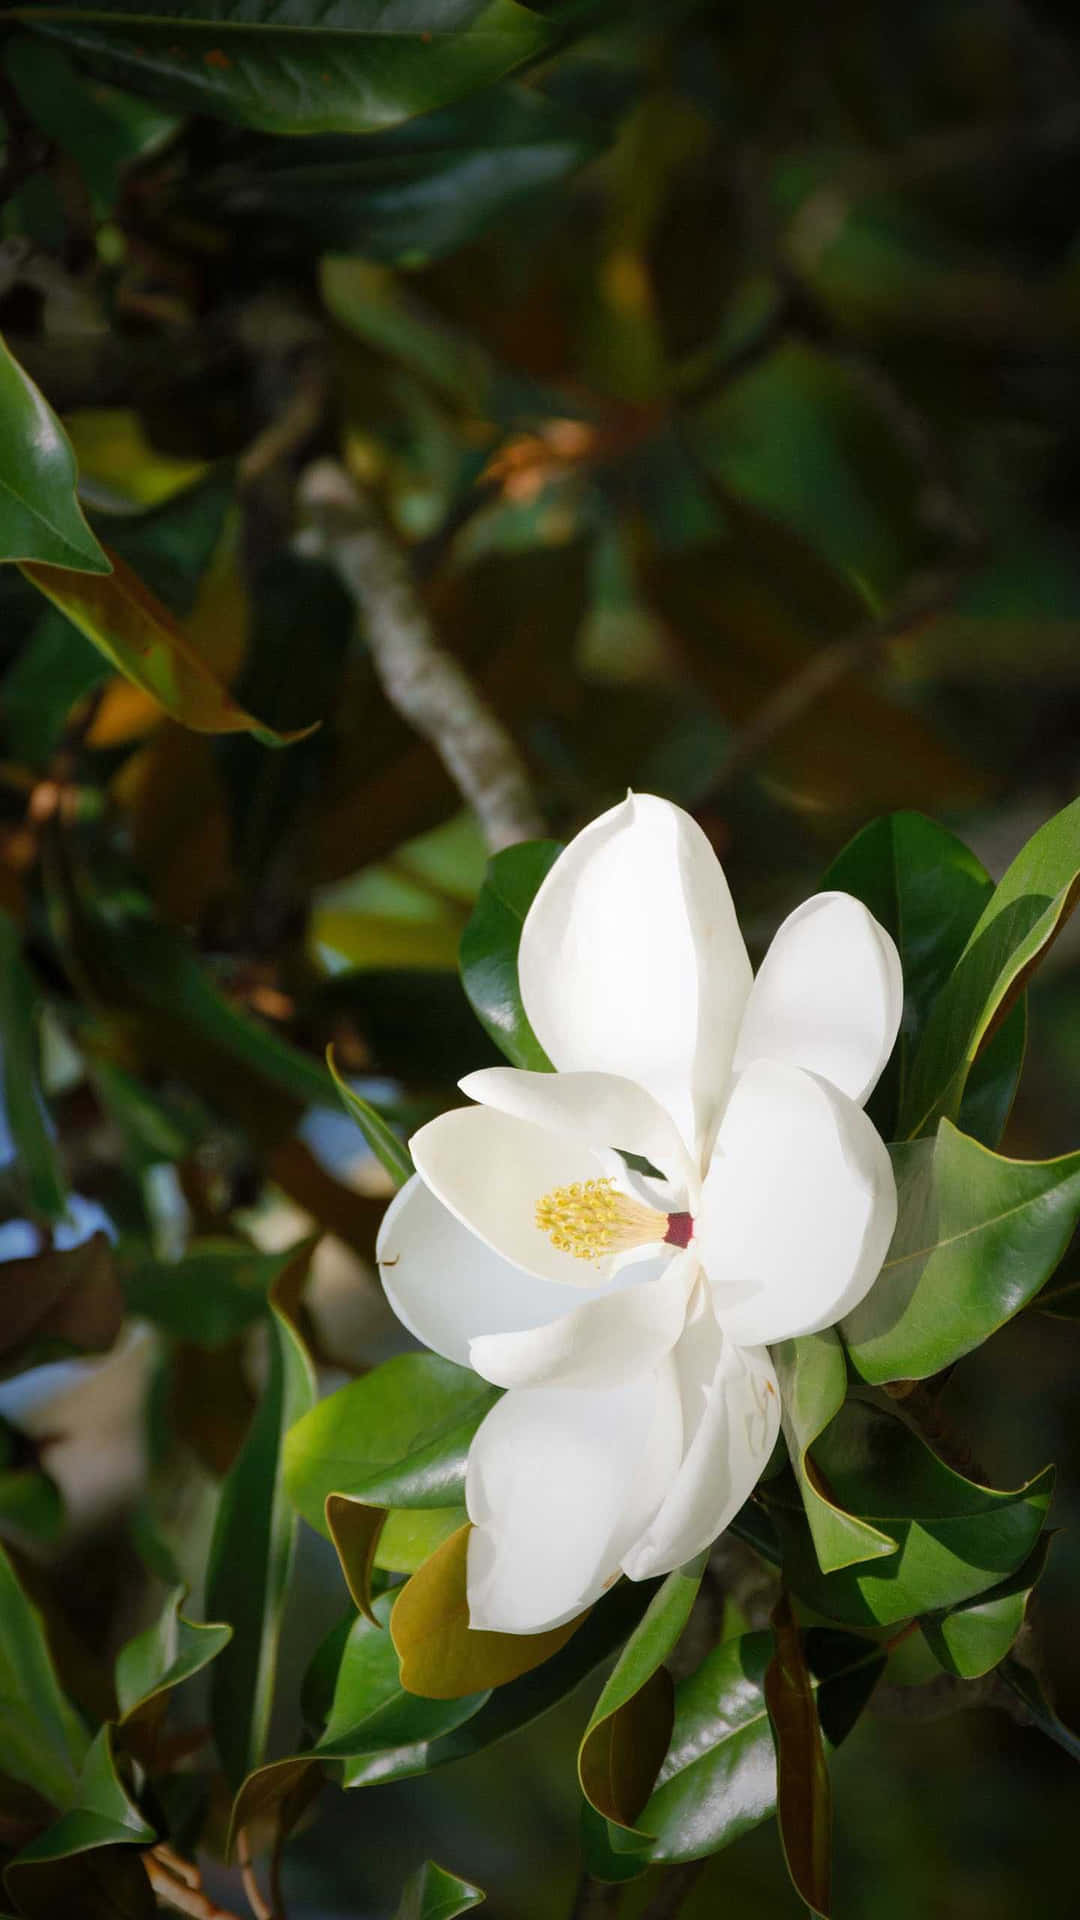 Hd Close Up Photo Of Southern Magnolia Flower Wallpaper